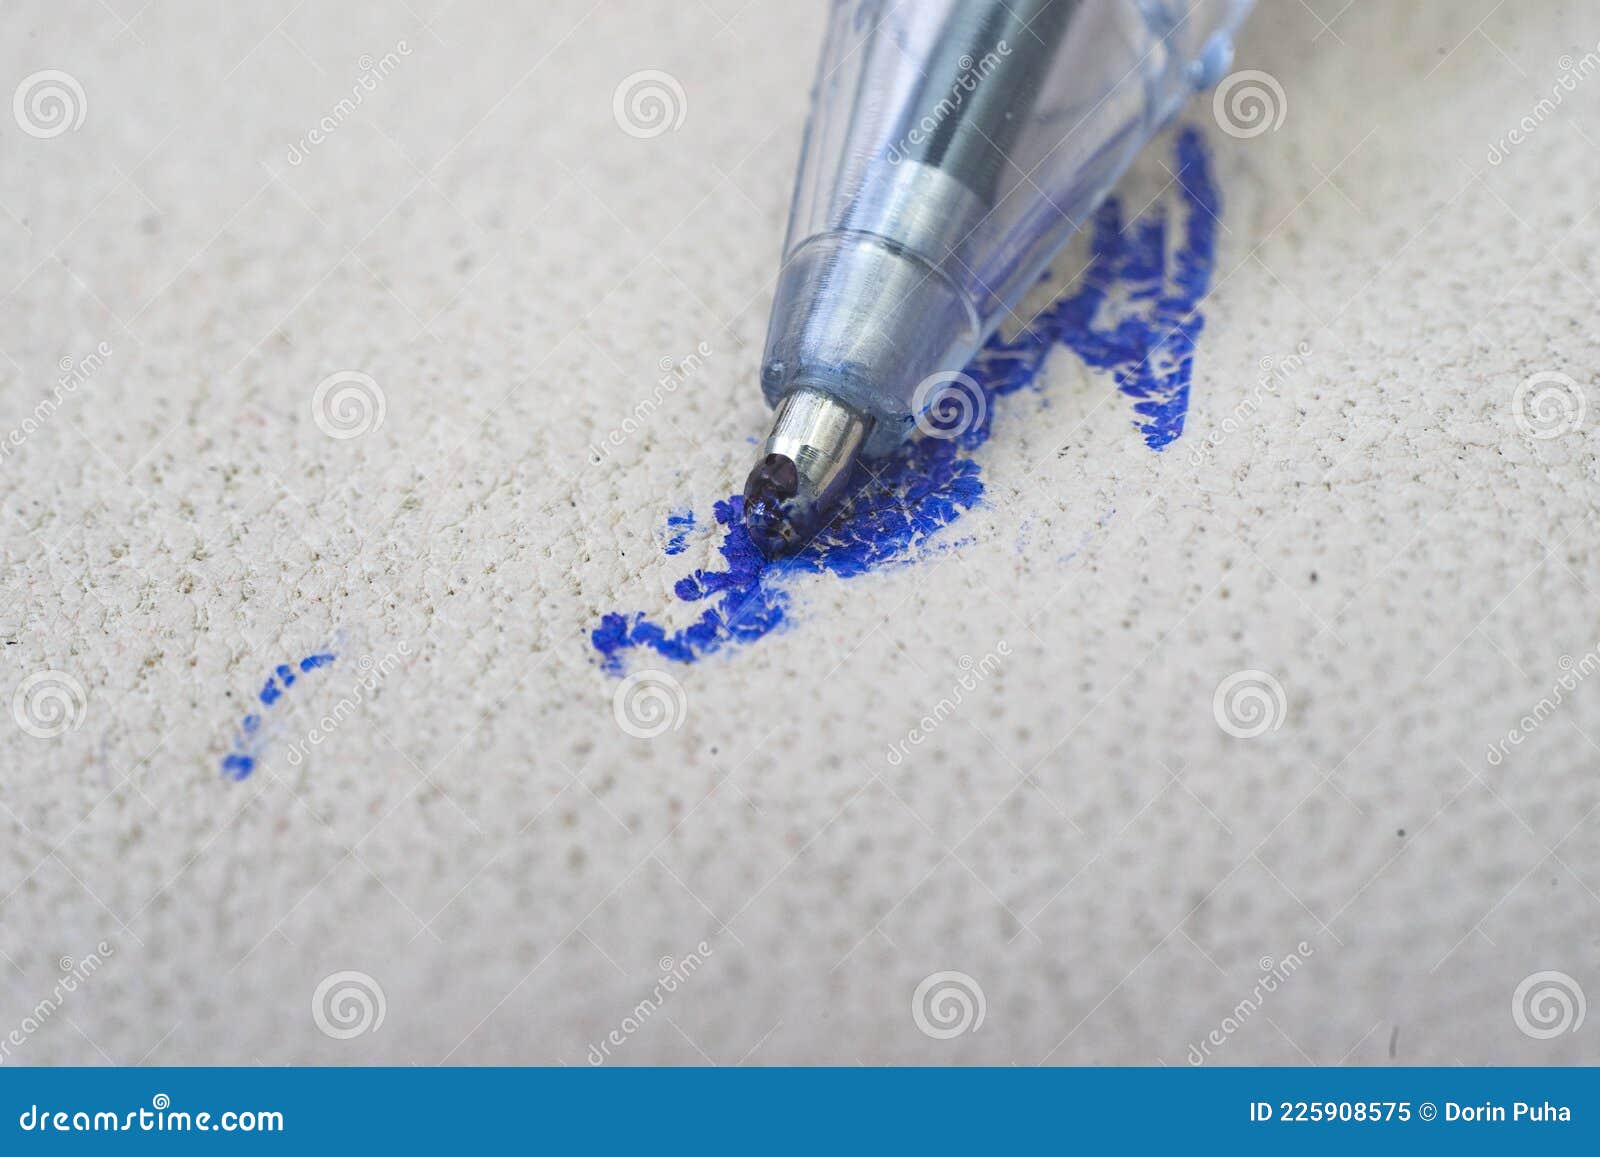 ballpoint pen tip, scribbling on a white leather sofa, or car seats.